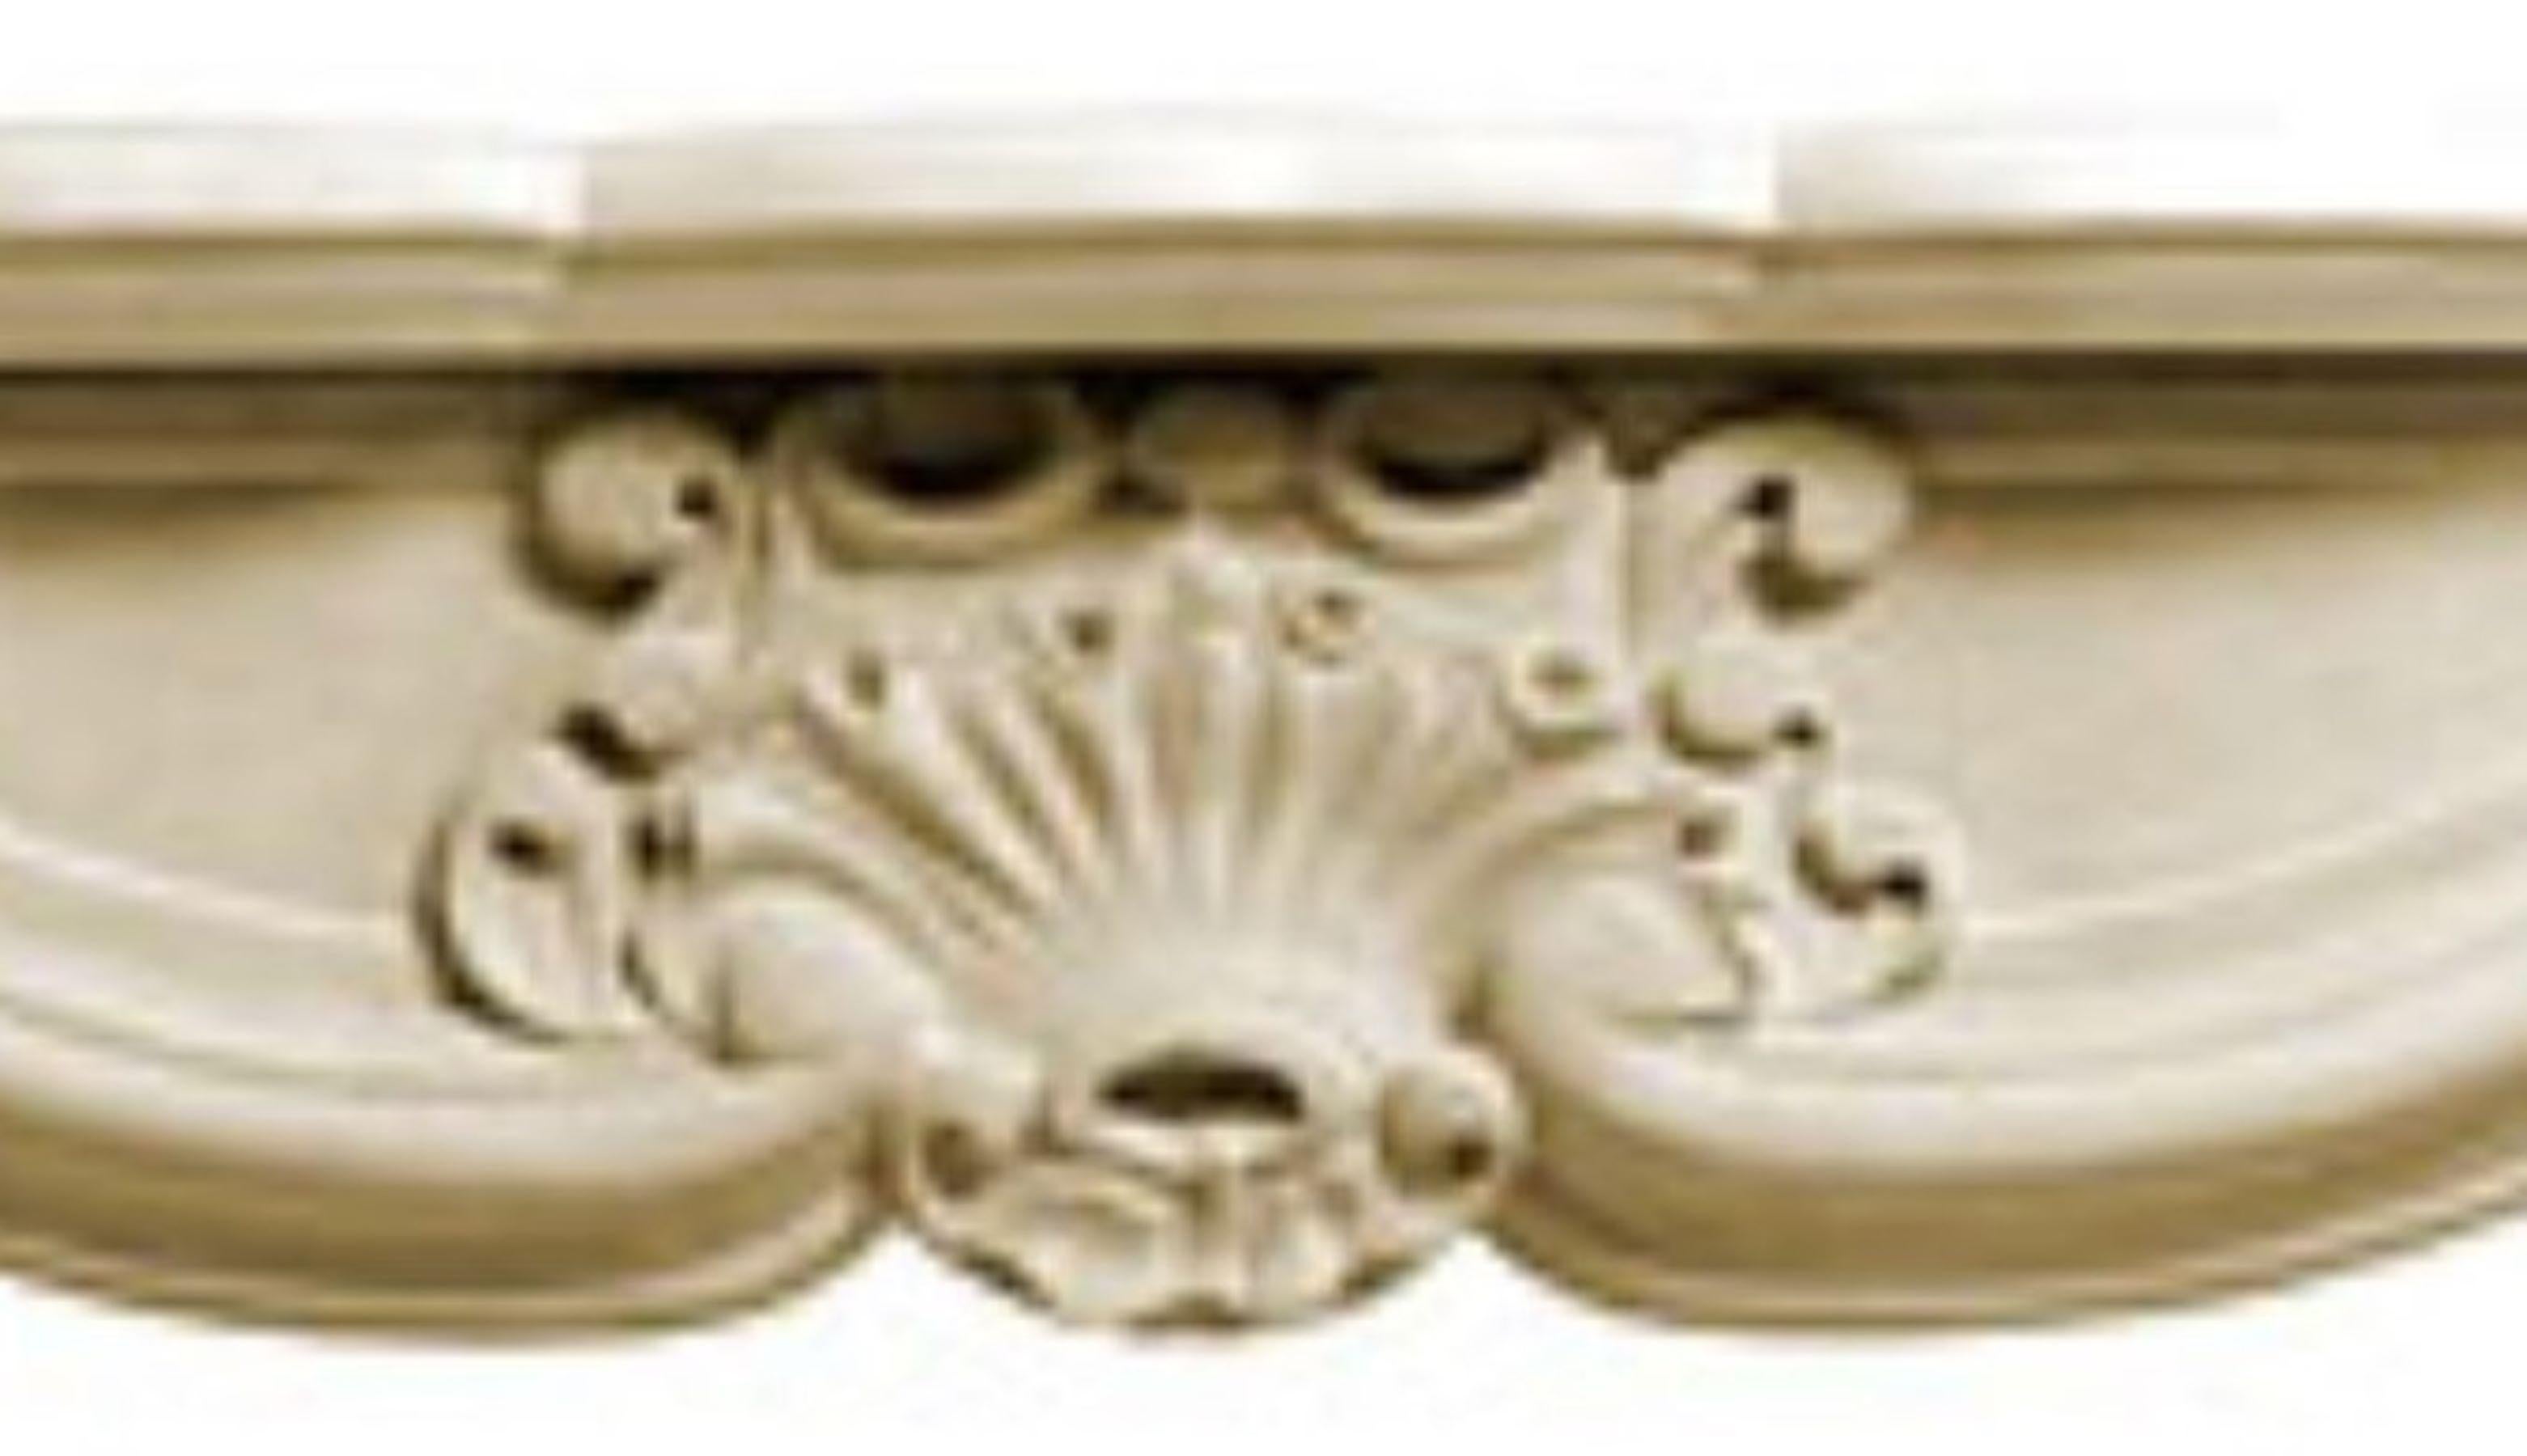 The Louis XV stone fireplace includes a curving top opening, typical of the 18th century Louis XV era in France.  There are many variations of this fireplace style, but ours includes a detailed anthemion carving as the centerpiece of the lintel,